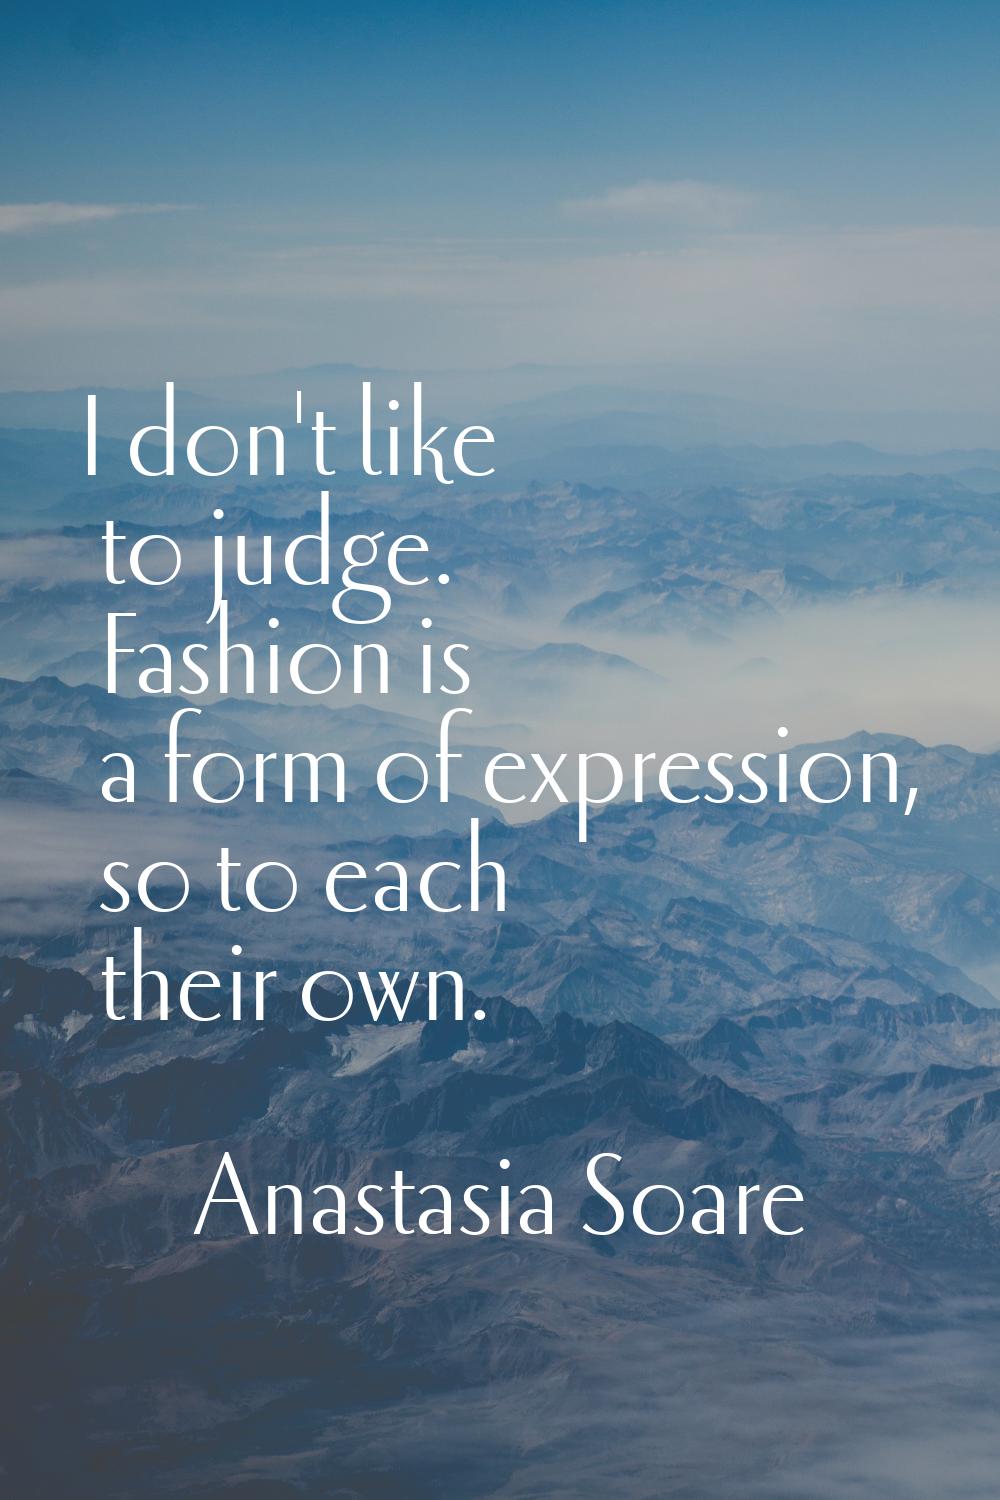 I don't like to judge. Fashion is a form of expression, so to each their own.